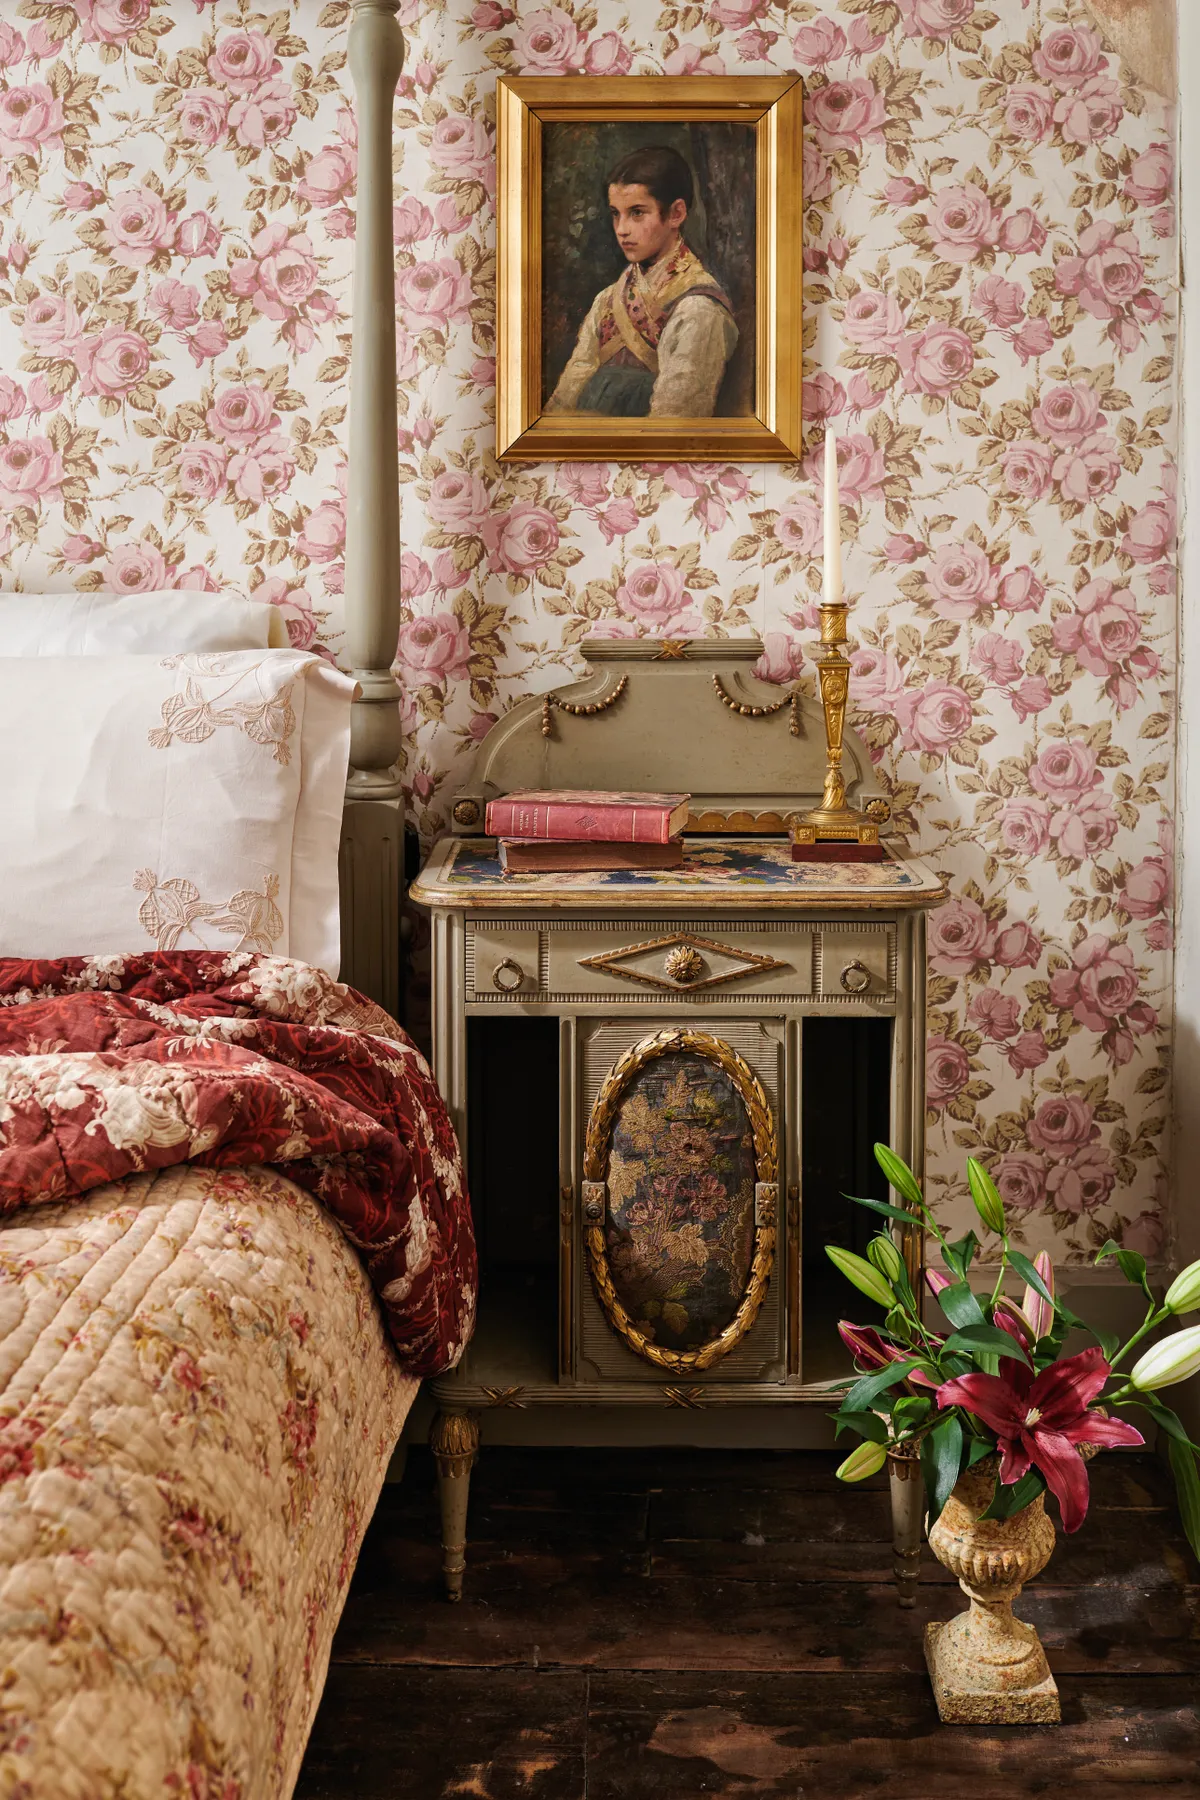 An antique four poster bed against bold floral wallpaper and a gold bedside table.